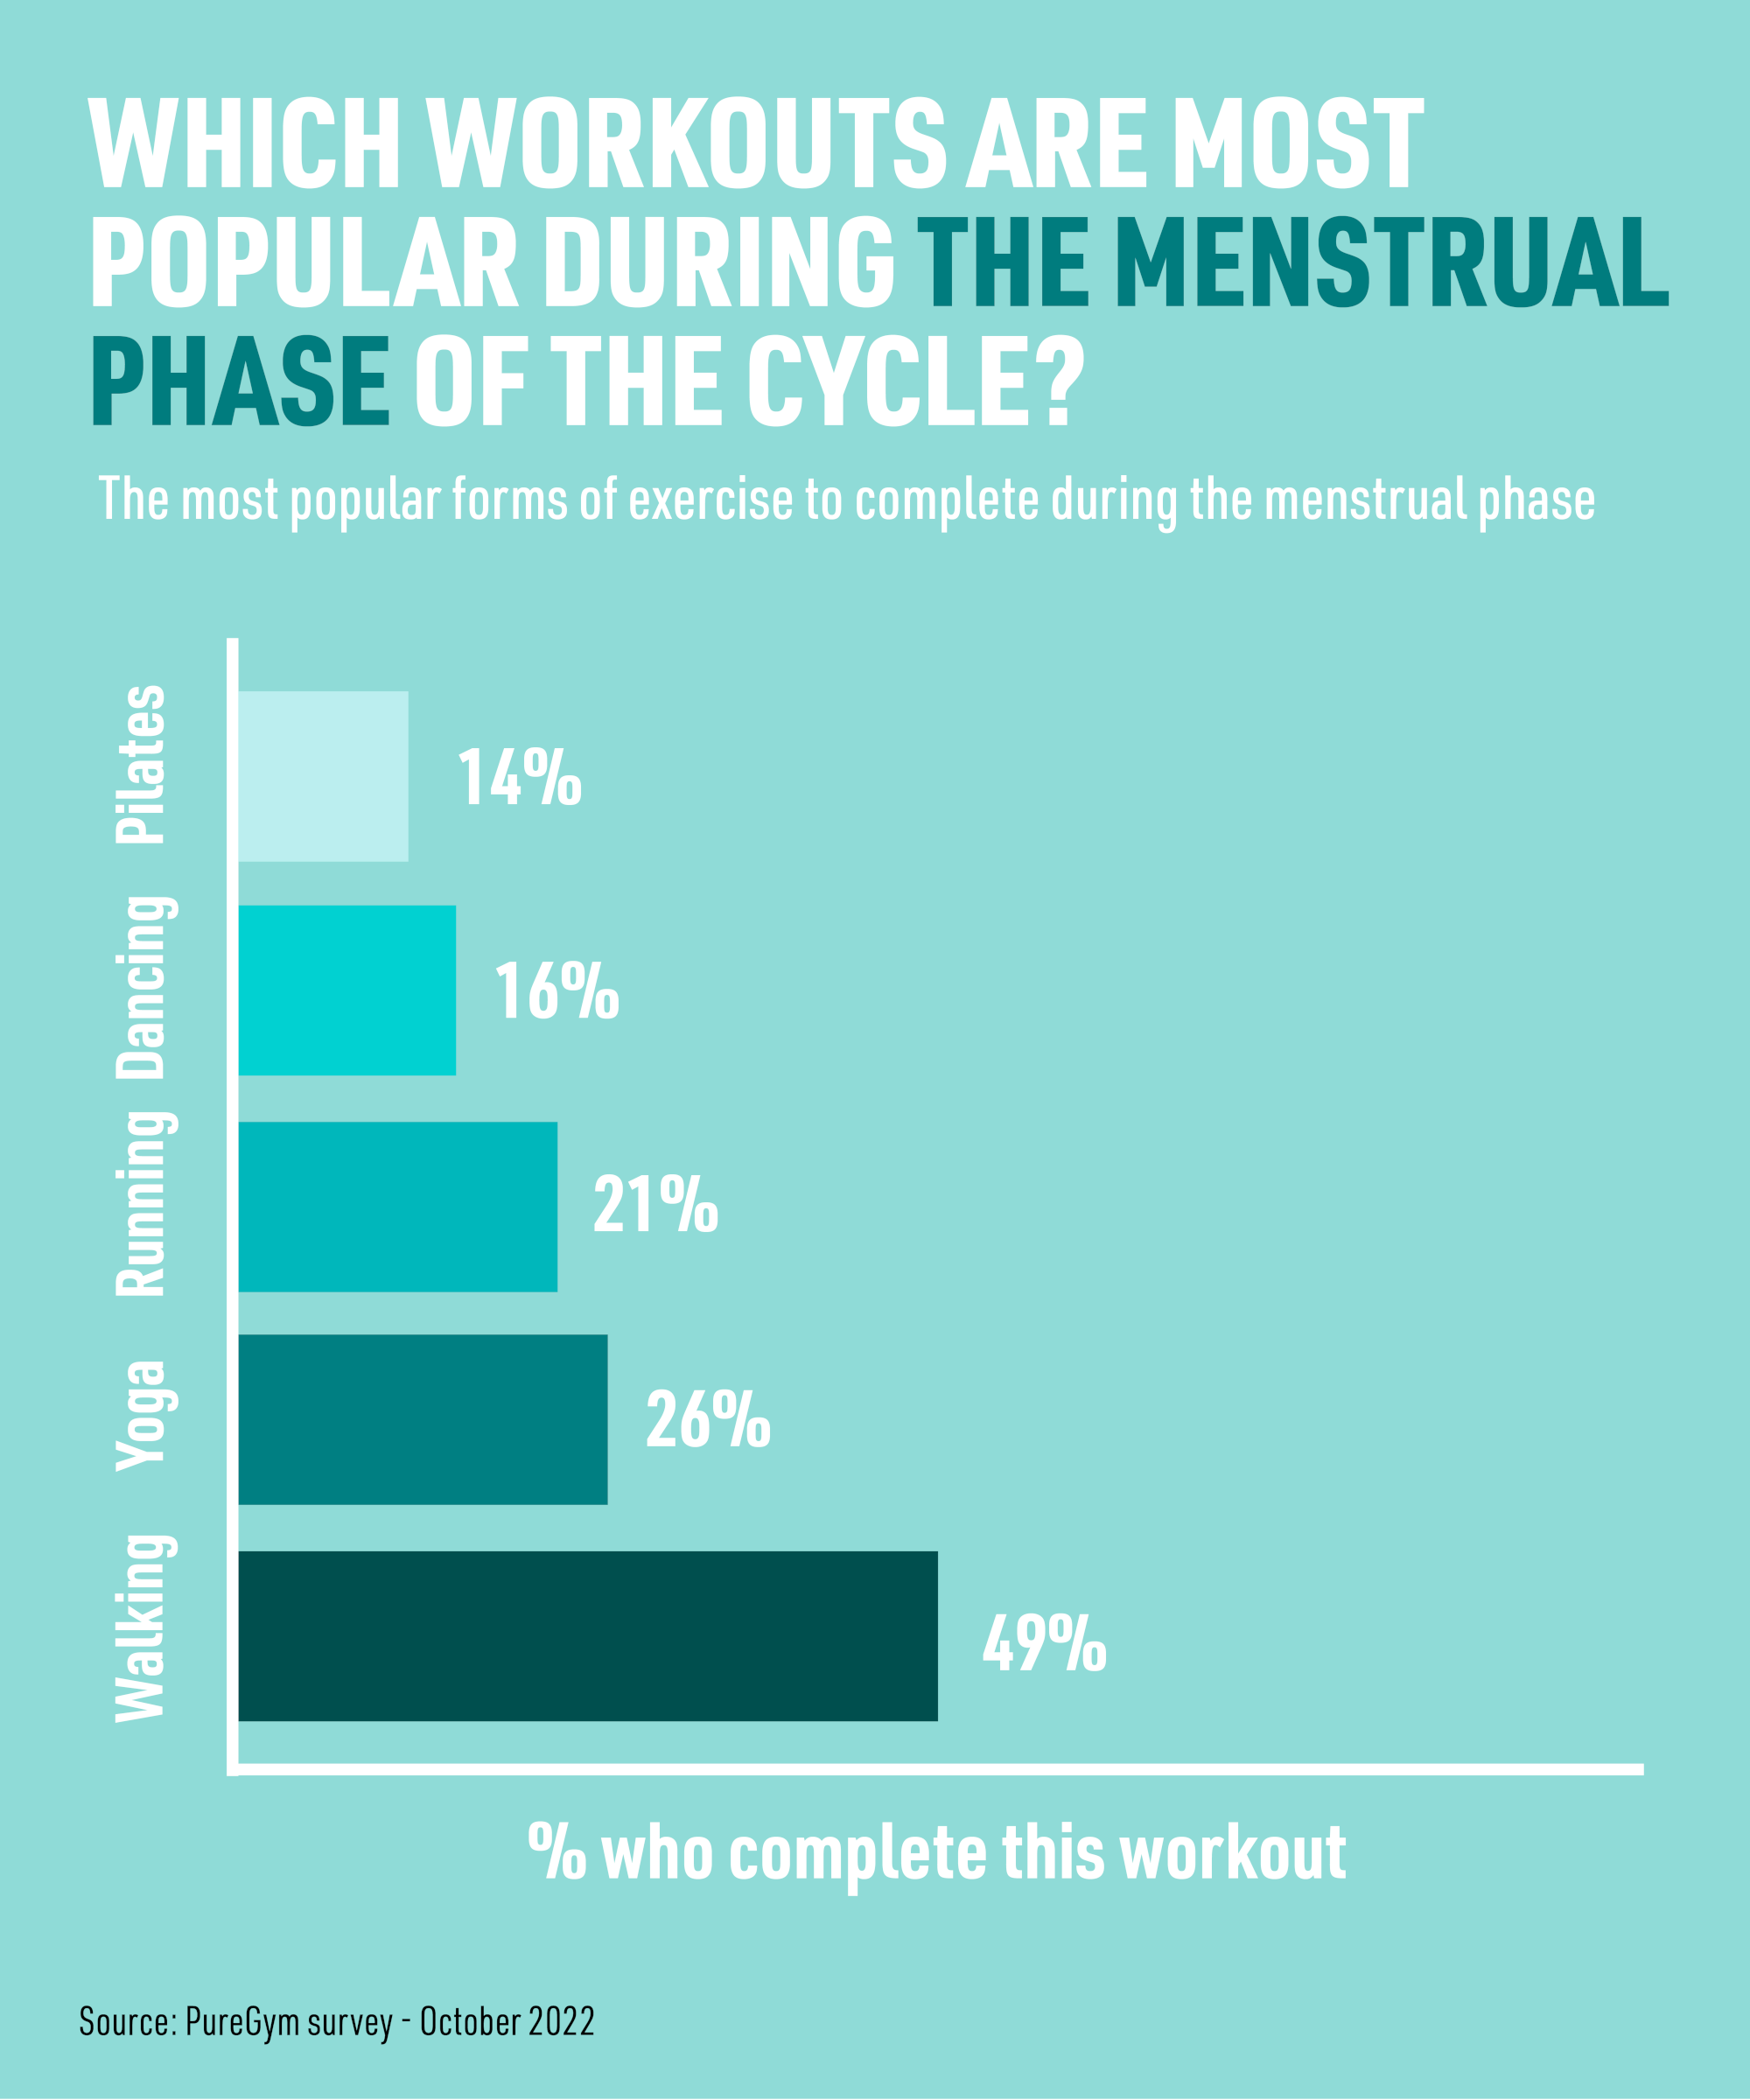 Which workouts are most popular during the menstrual phase of the cycle?